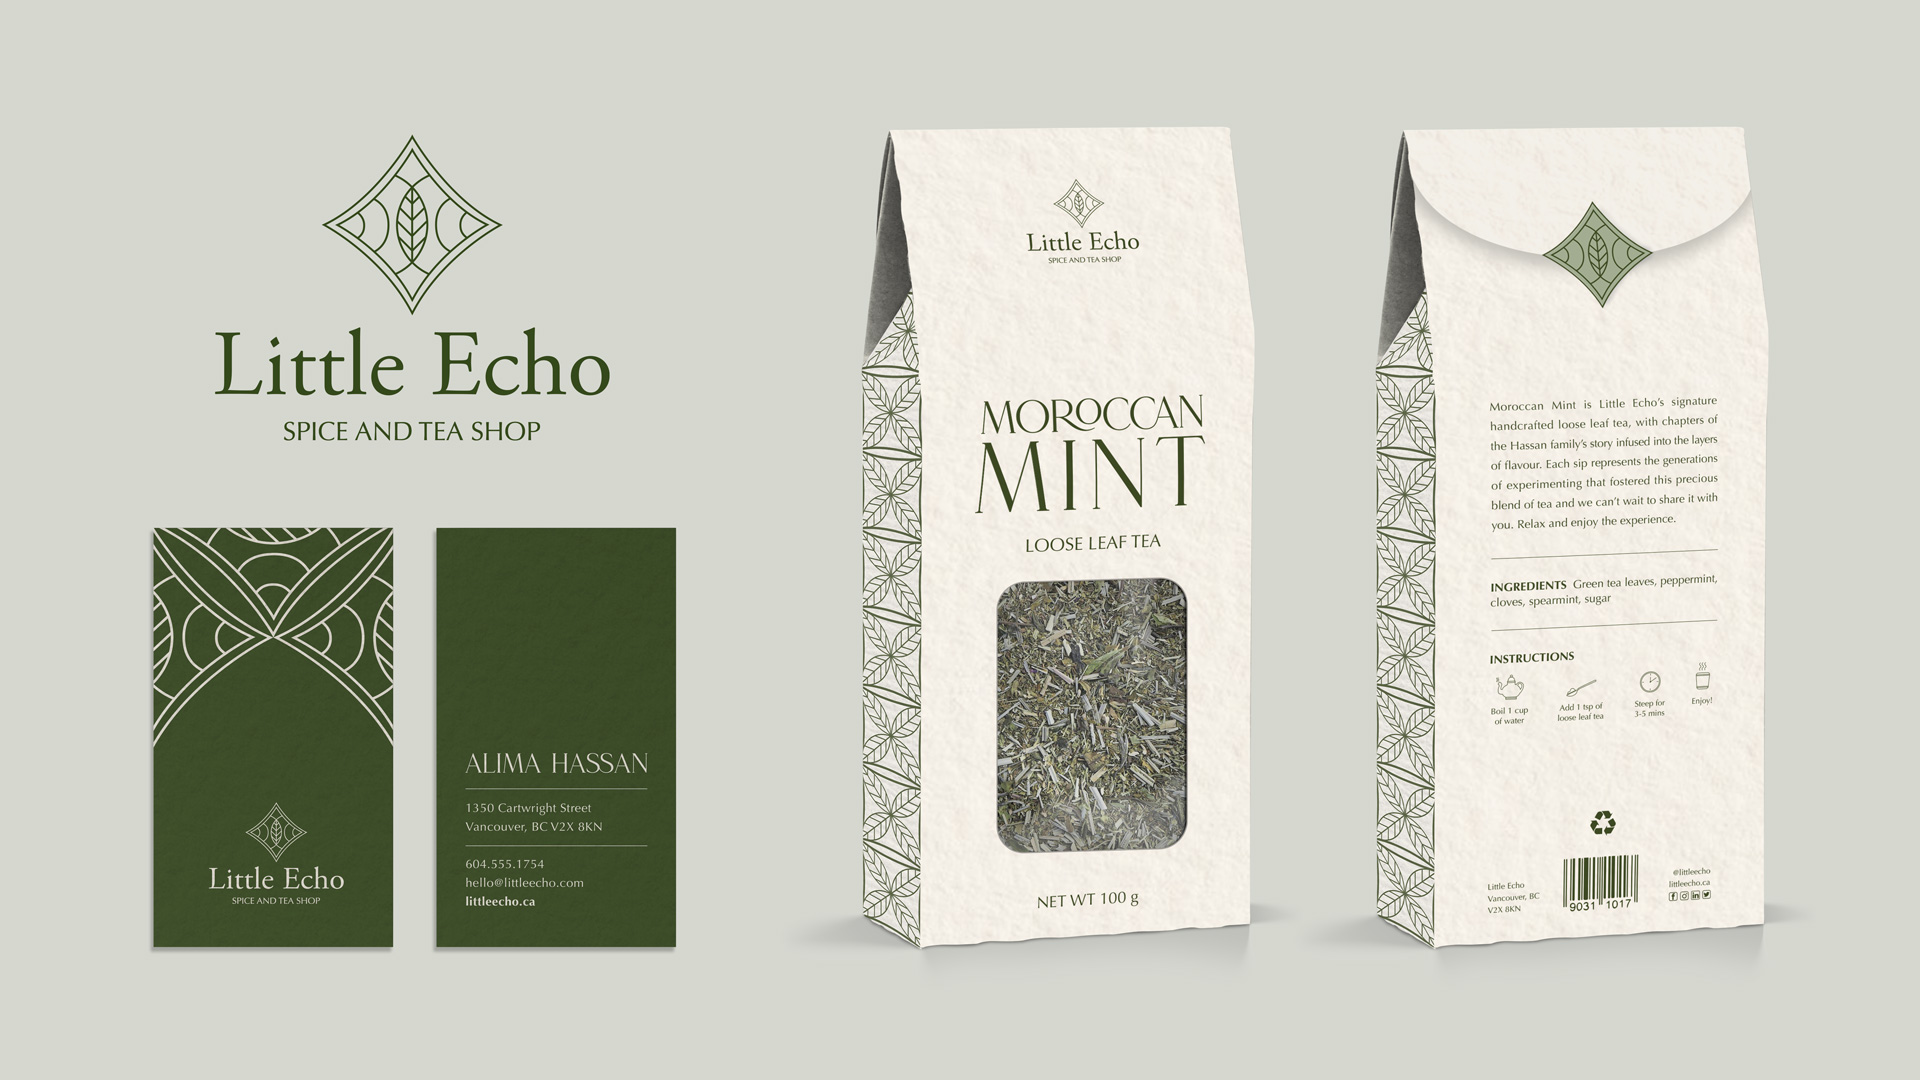 Brand identity including logo design, package design and business cards for Little Echo, a Moroccan-inspired spice and tea shop.